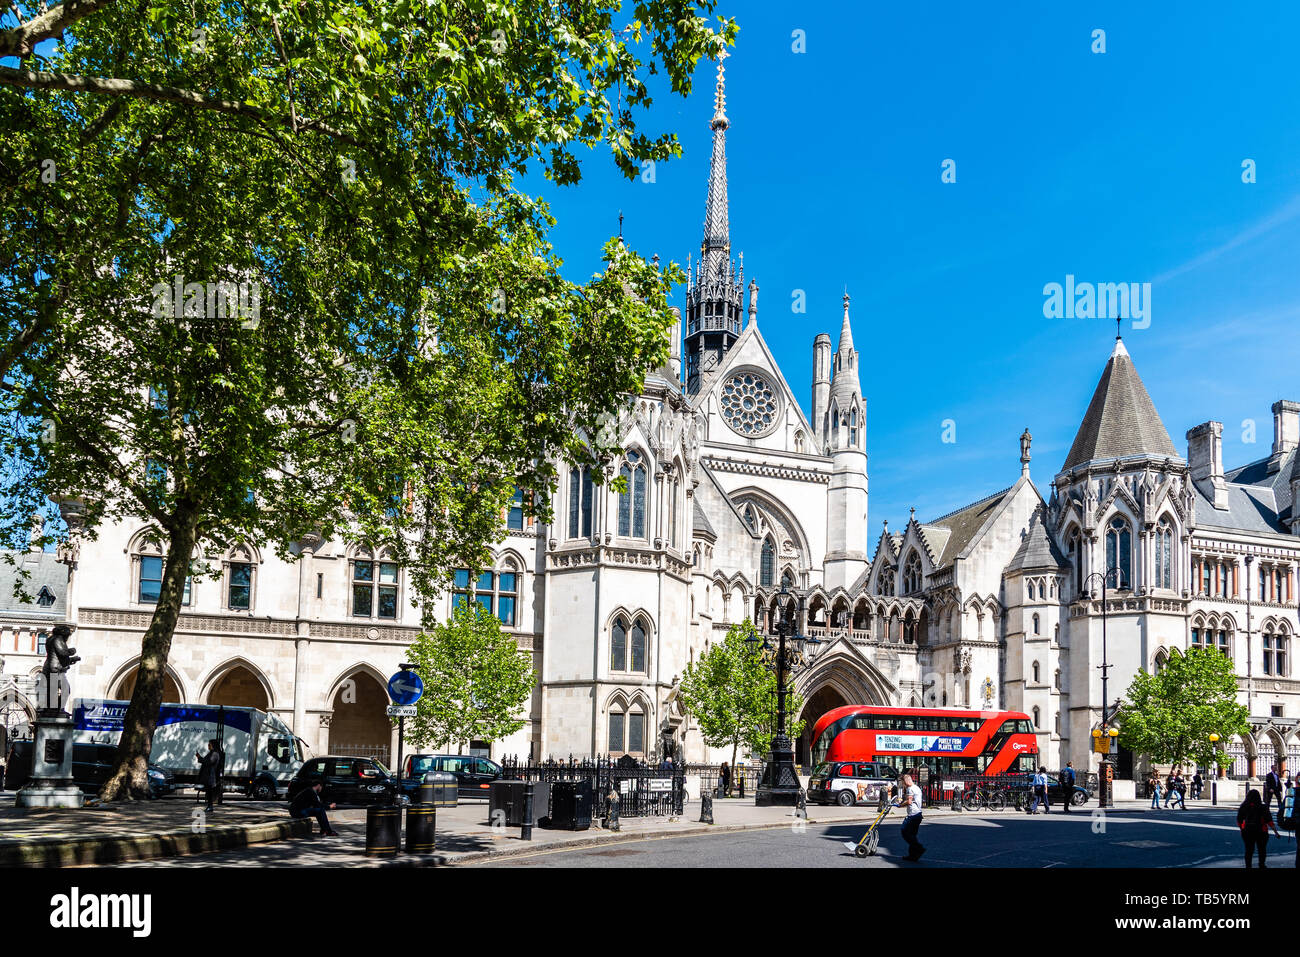 London, UK - May 14, 2019: Royal Courts of Justice located on Strand within the City of Westminster, near the border with the City of London Stock Photo